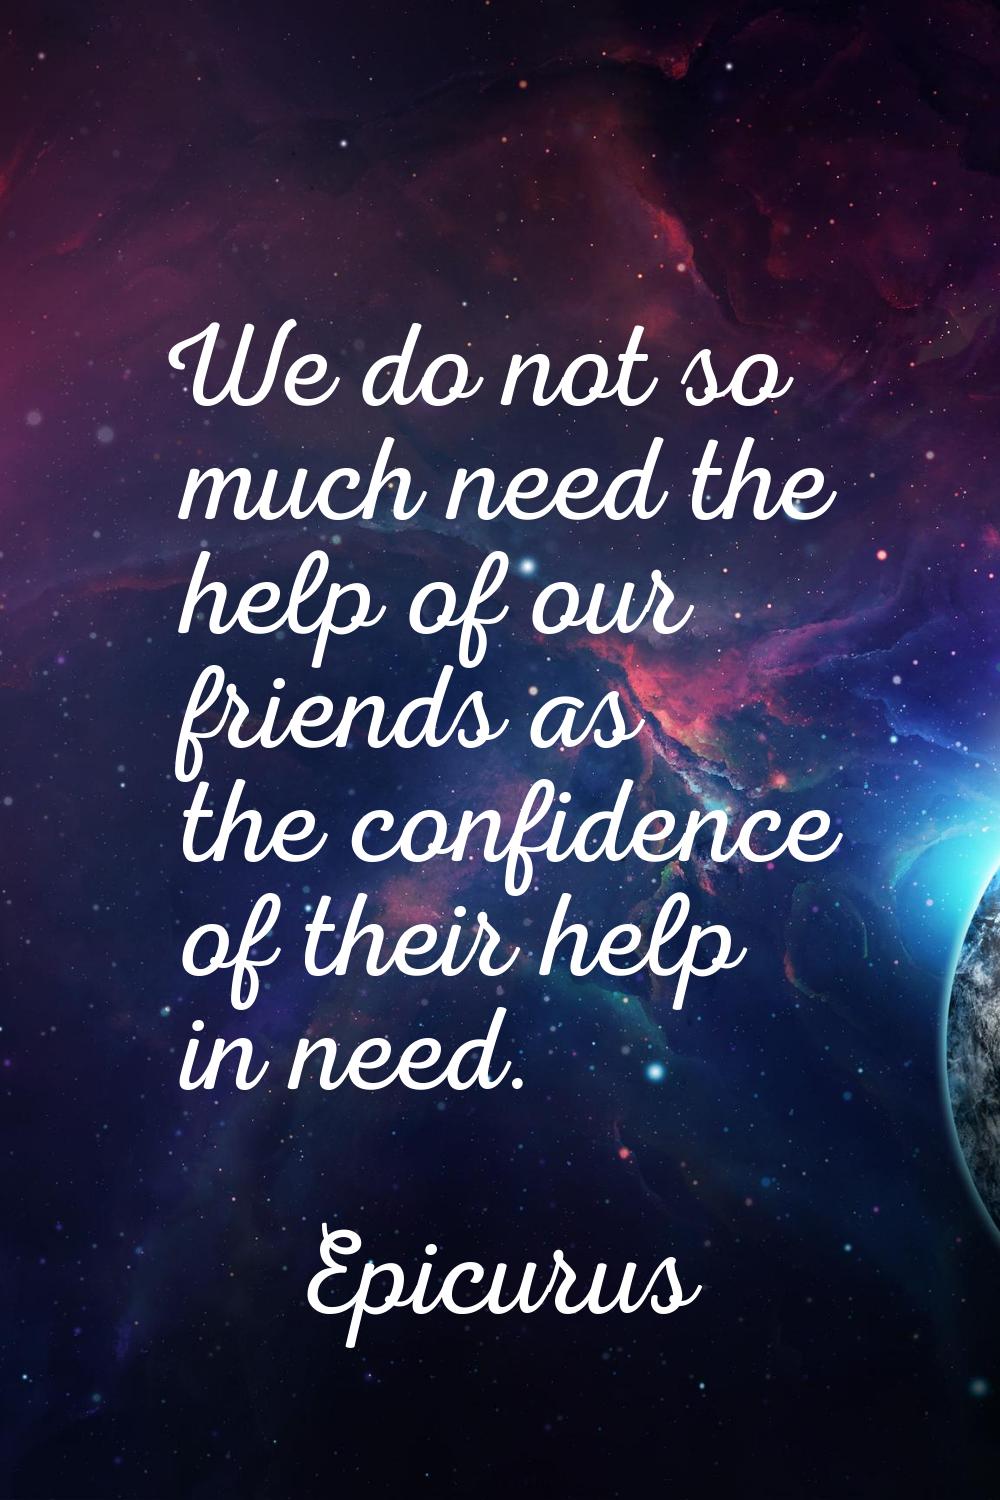 We do not so much need the help of our friends as the confidence of their help in need.